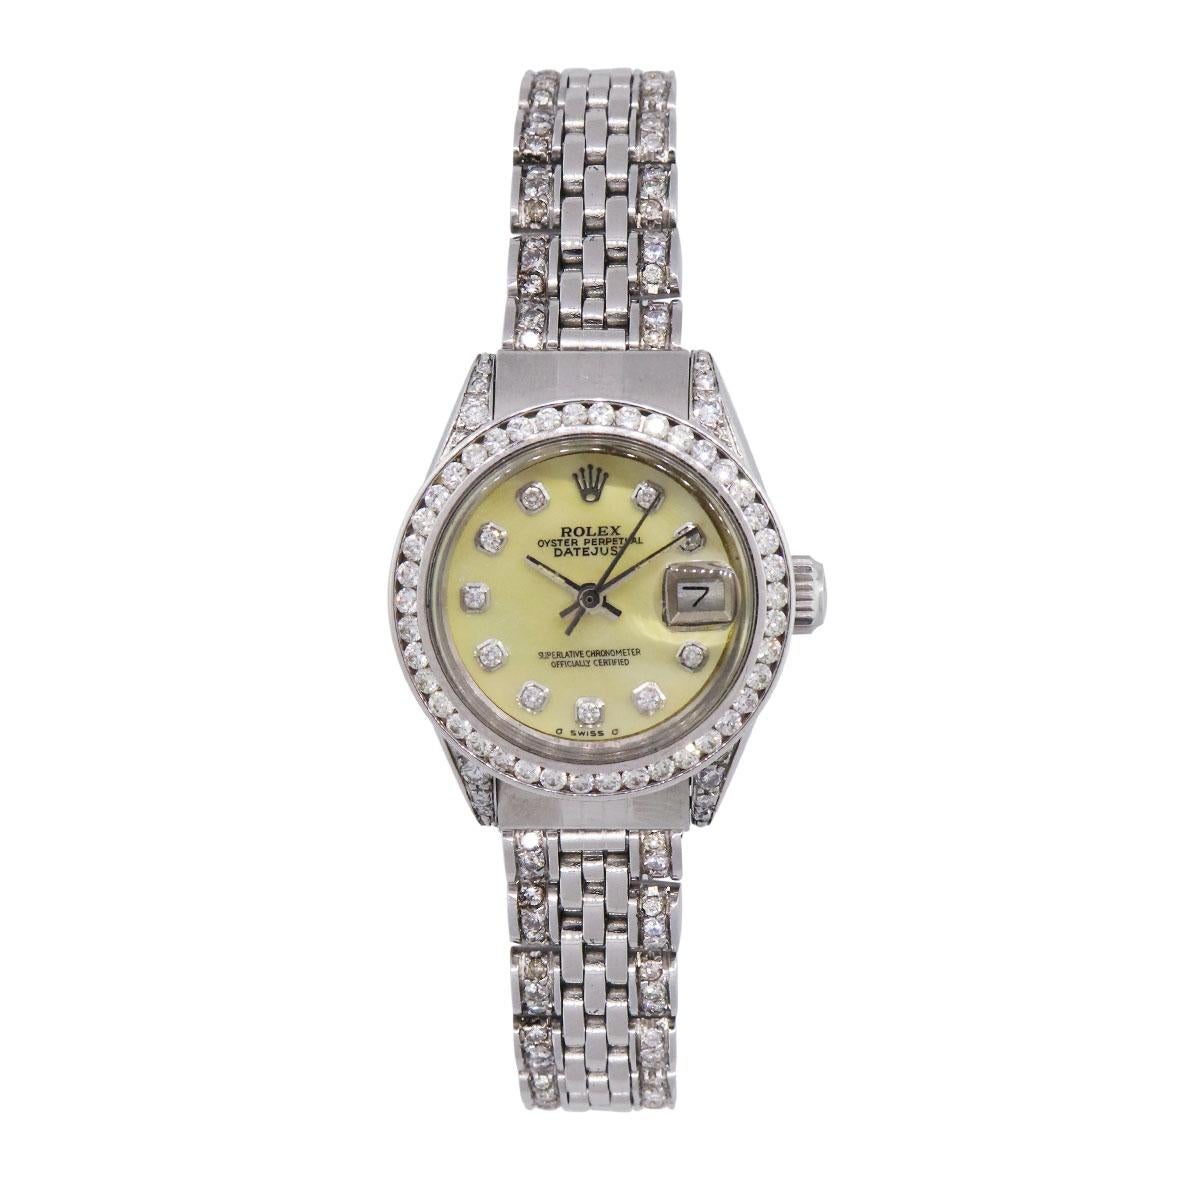 Brand: Rolex
MPN: 69173
Model: Datejust
Case Material: Stainless steel
Case Diameter: 26mm
Bezel: Diamond bezel (aftermarket)
Dial: Mother of pearl diamond dial (aftermarket)
Bracelet: Stainless steel diamond jubilee band (aftermarket)
Crystal: